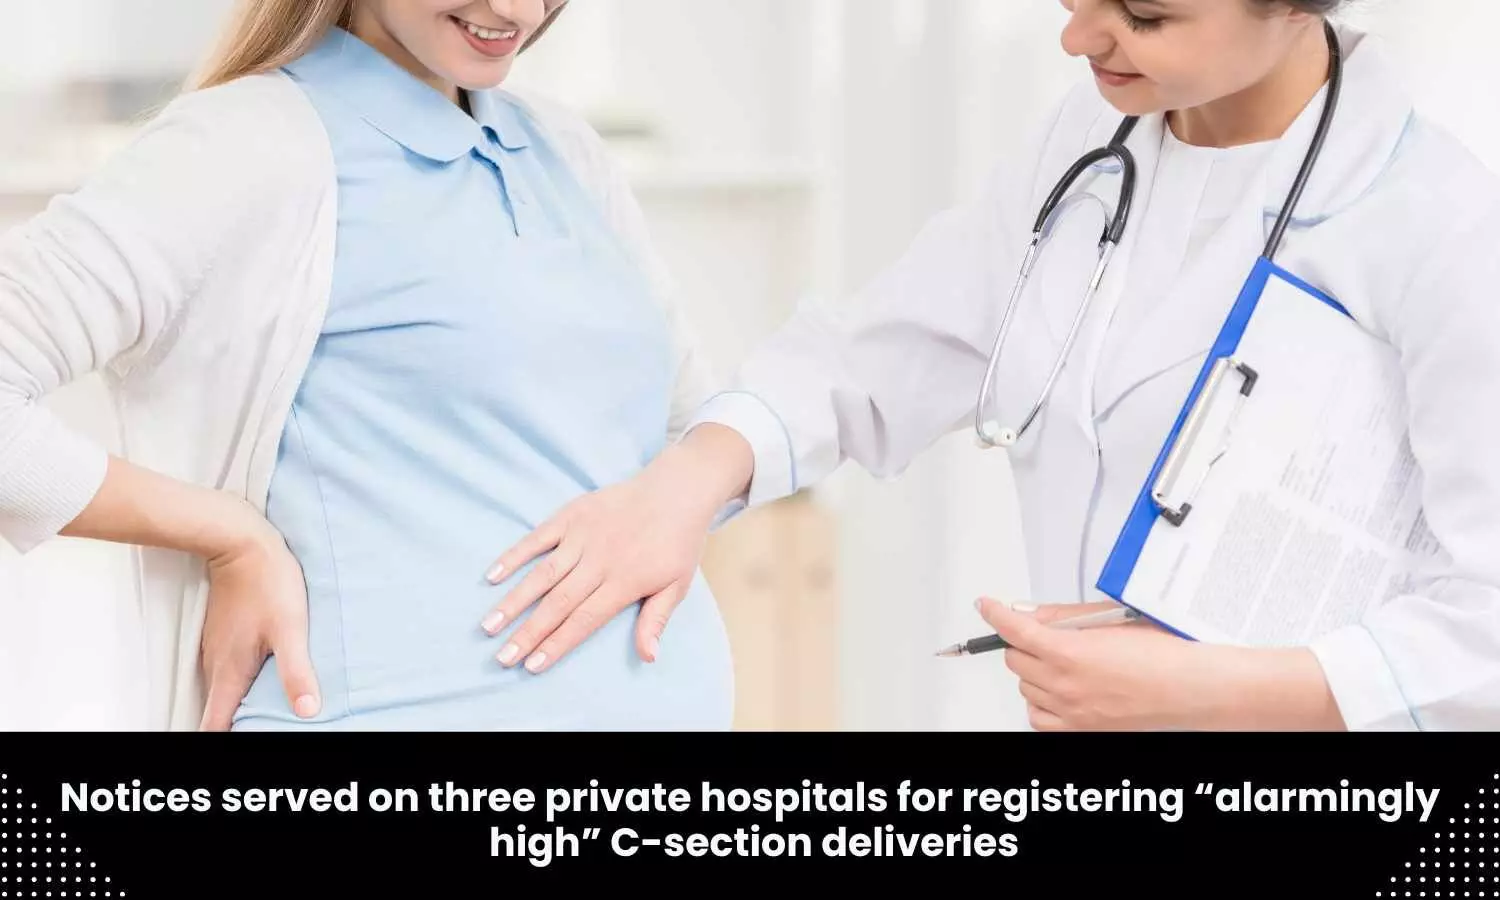 3 private hospitals get notices for registering alarmingly high C-section deliveries